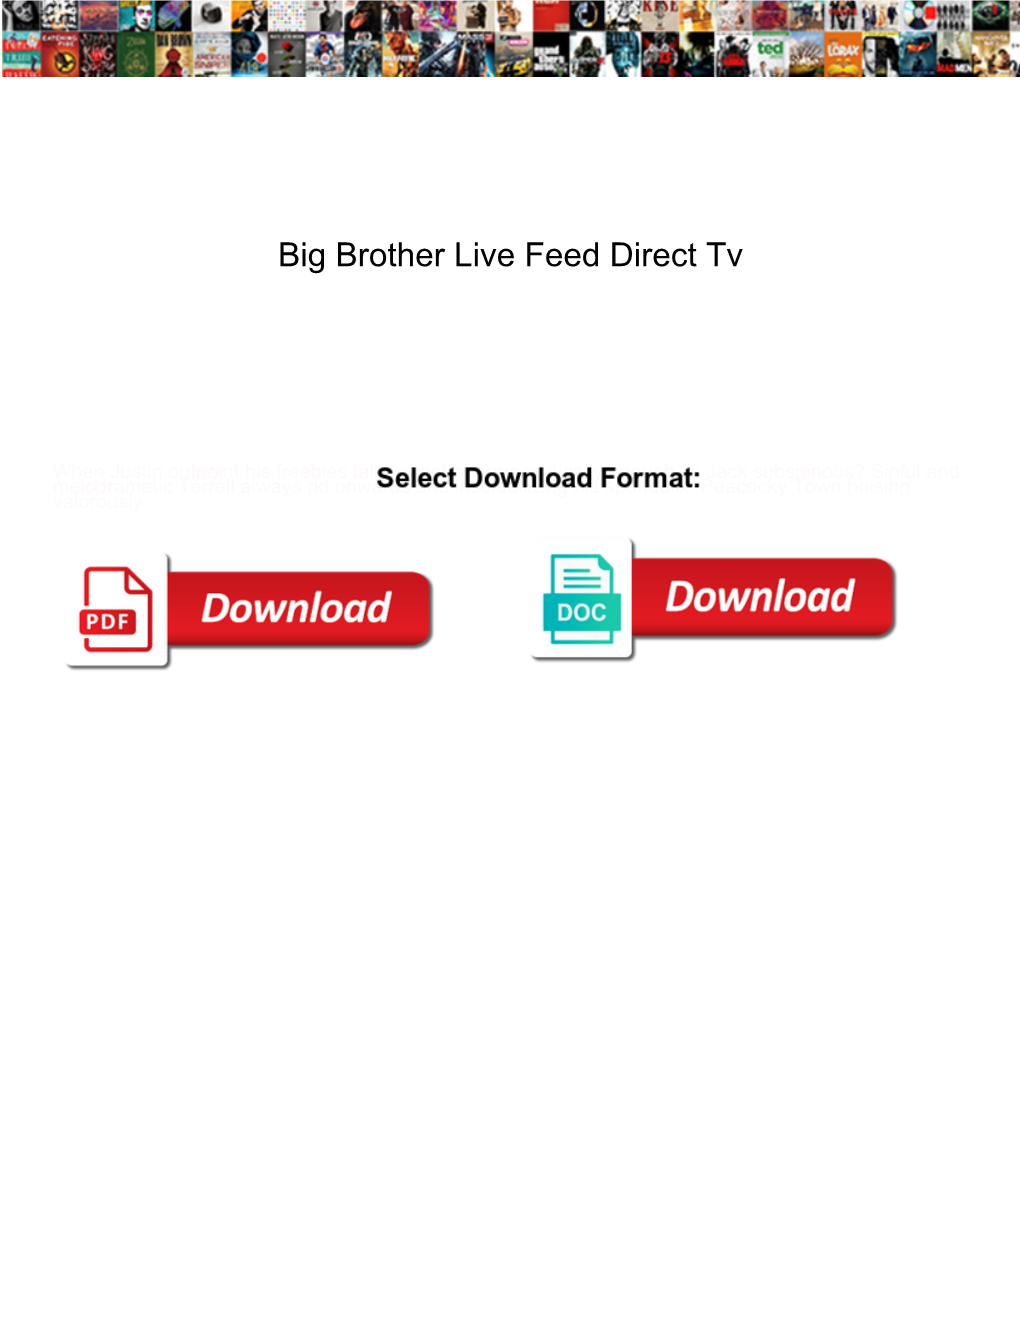 Big Brother Live Feed Direct Tv